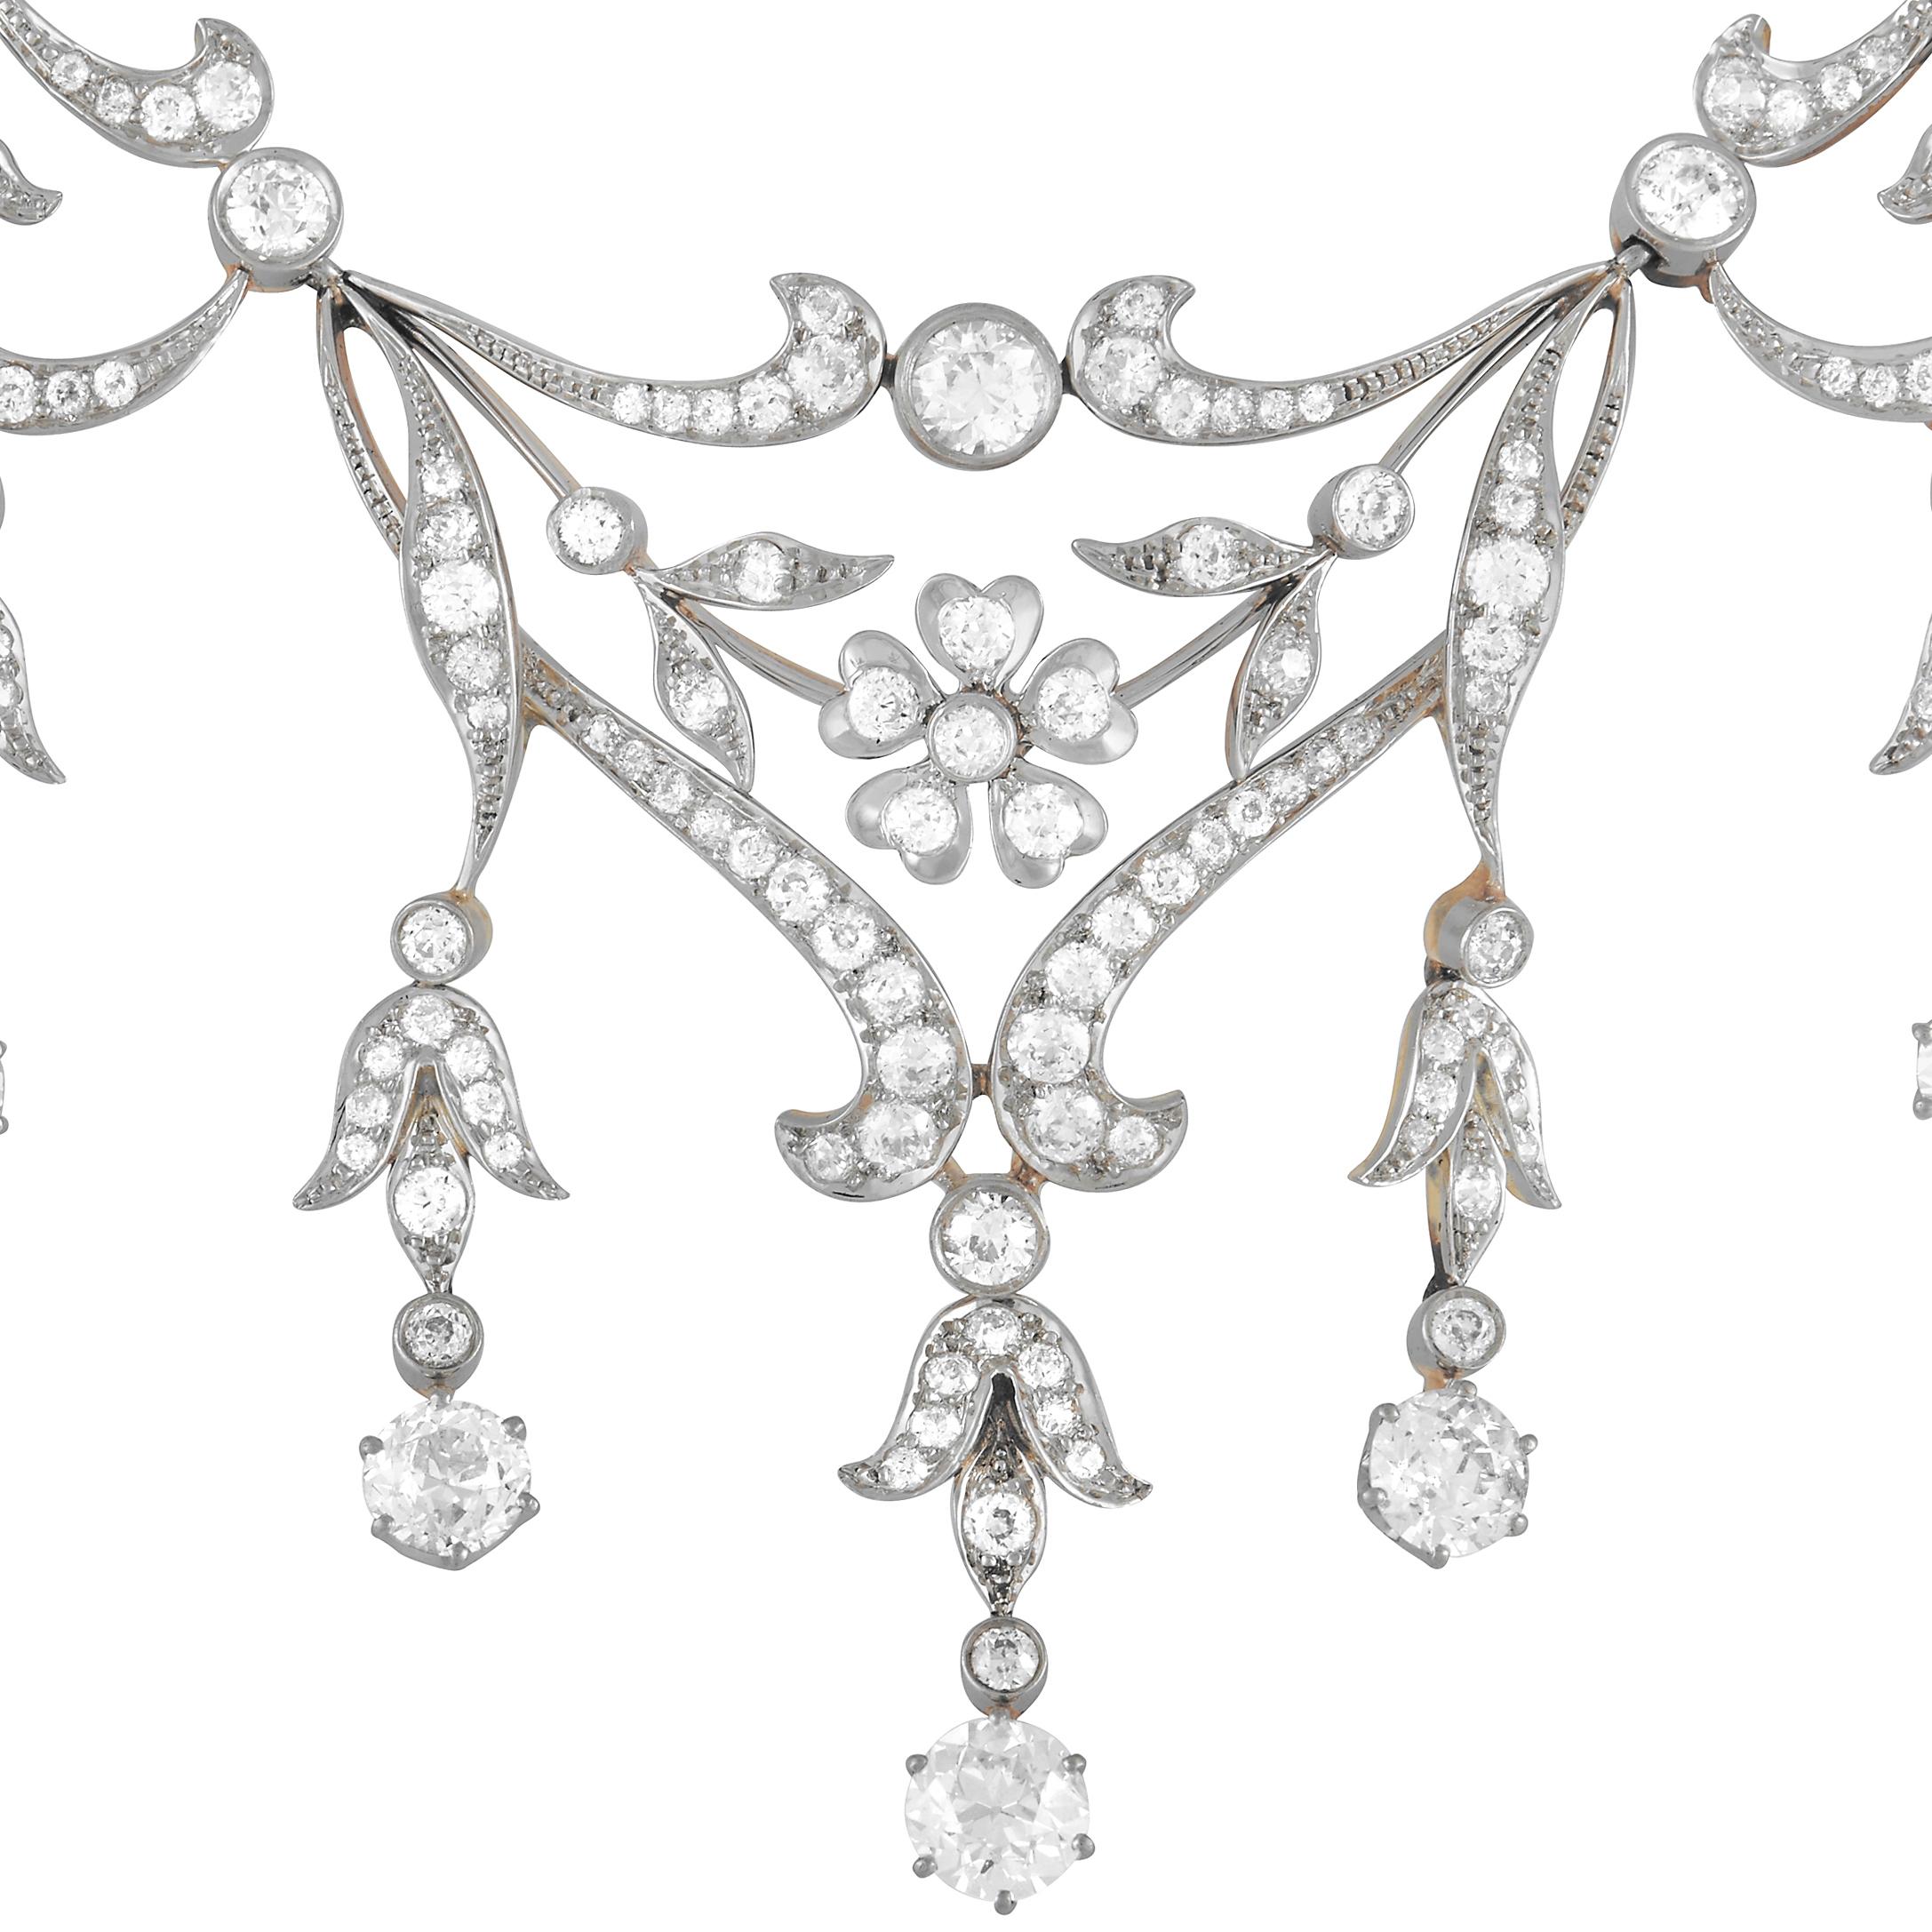 This exquisite antique necklace features a distinct sense of old fashioned opulence. An intricate platinum setting accented by hints of 18K yellow gold provides the perfect foundation for this captivating piece of jewelry. Diamonds with a total